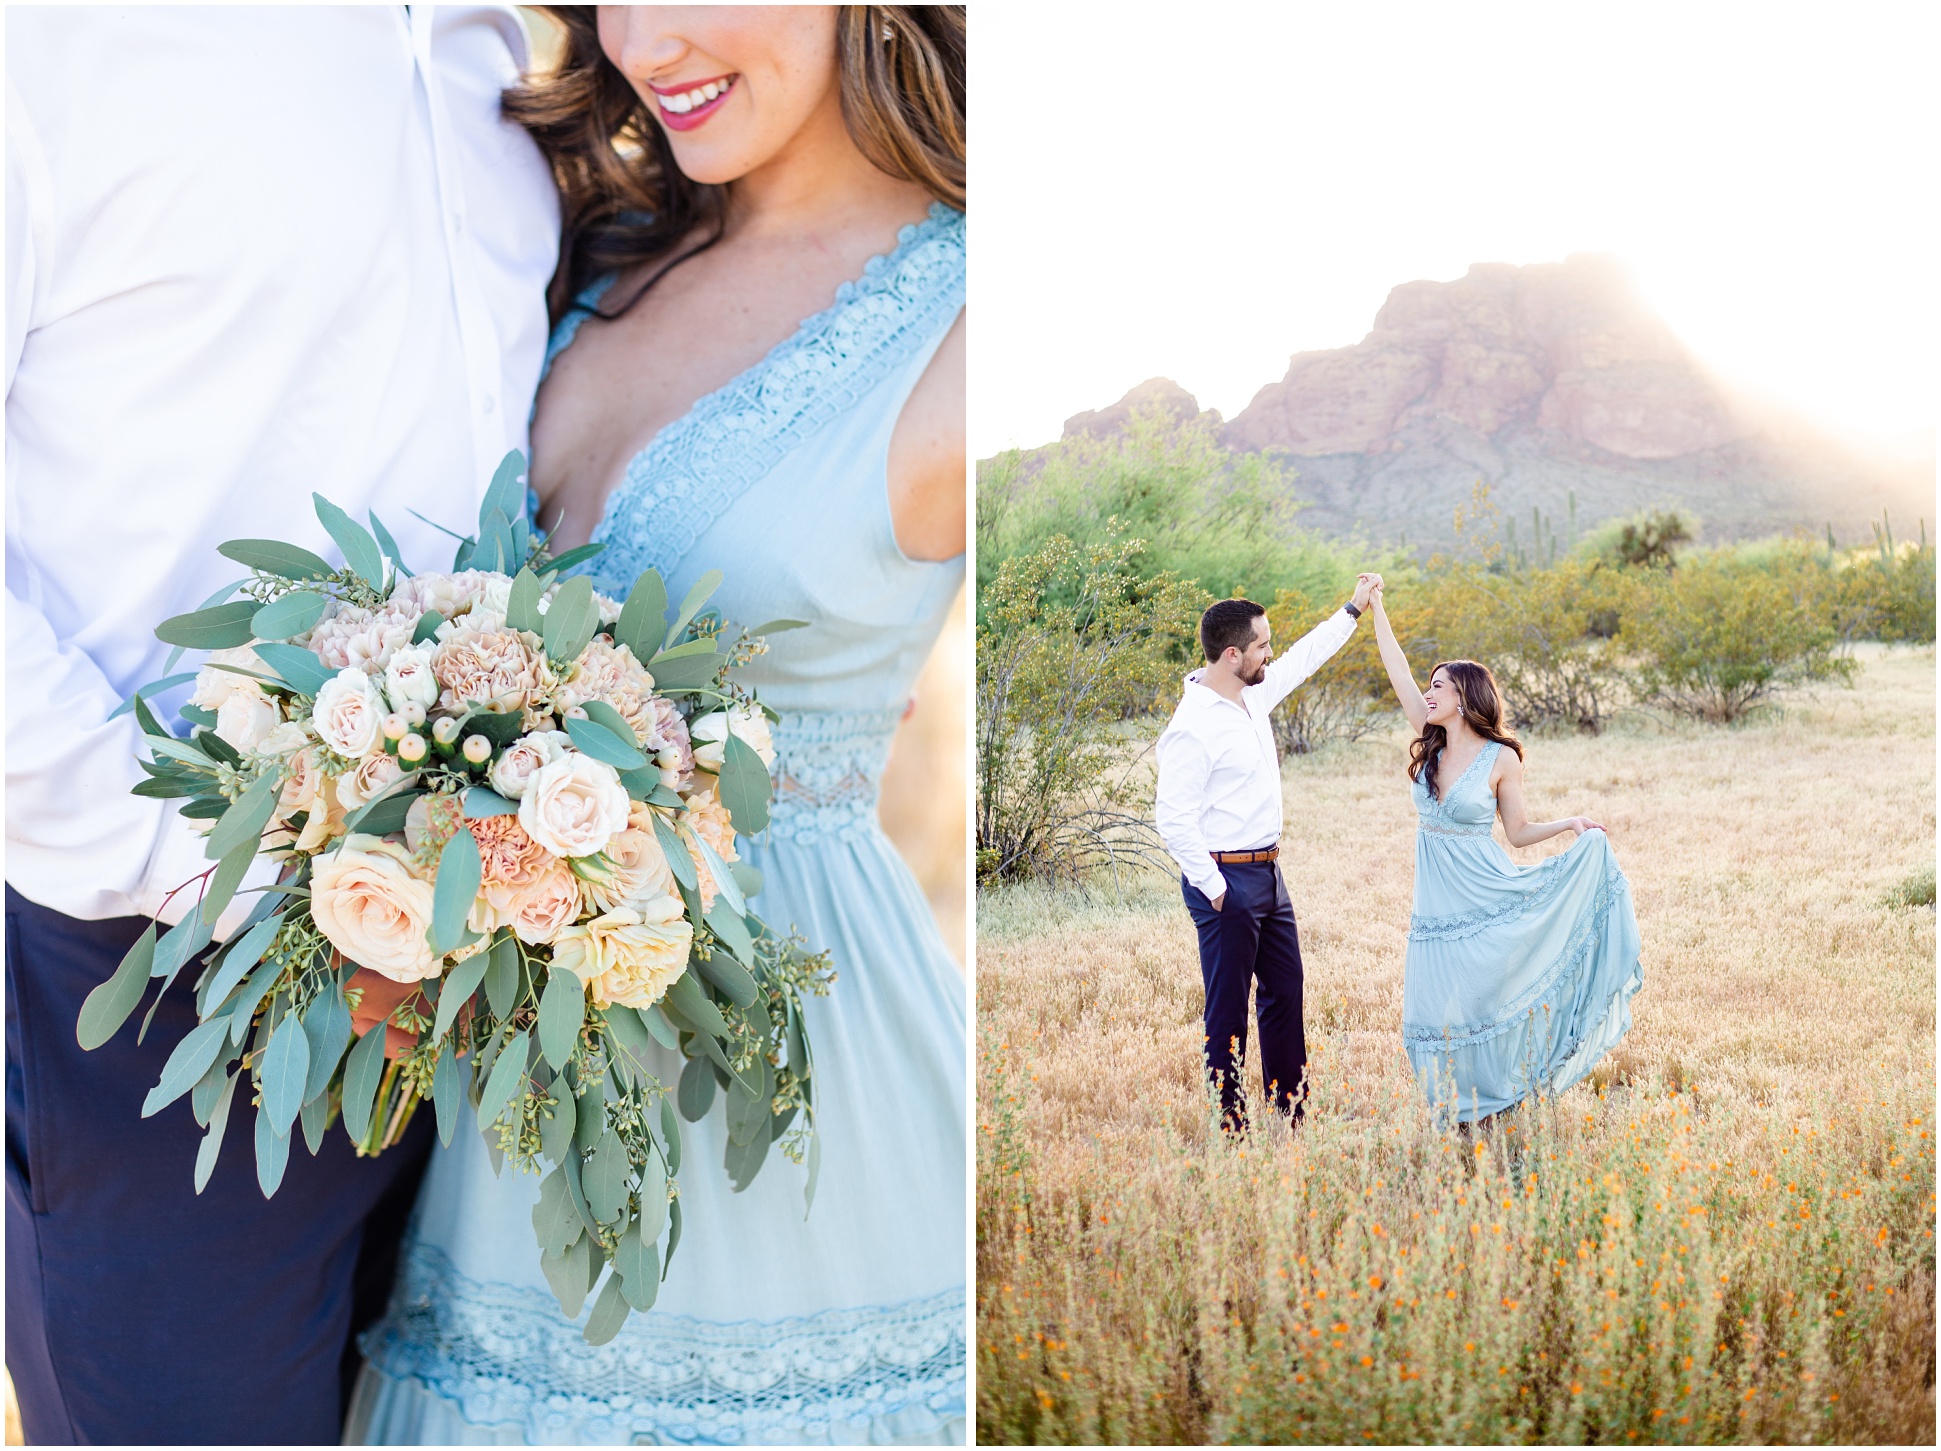 Left: Blush bouquet with greenery, right: Anette and Paul dancing as the sun set